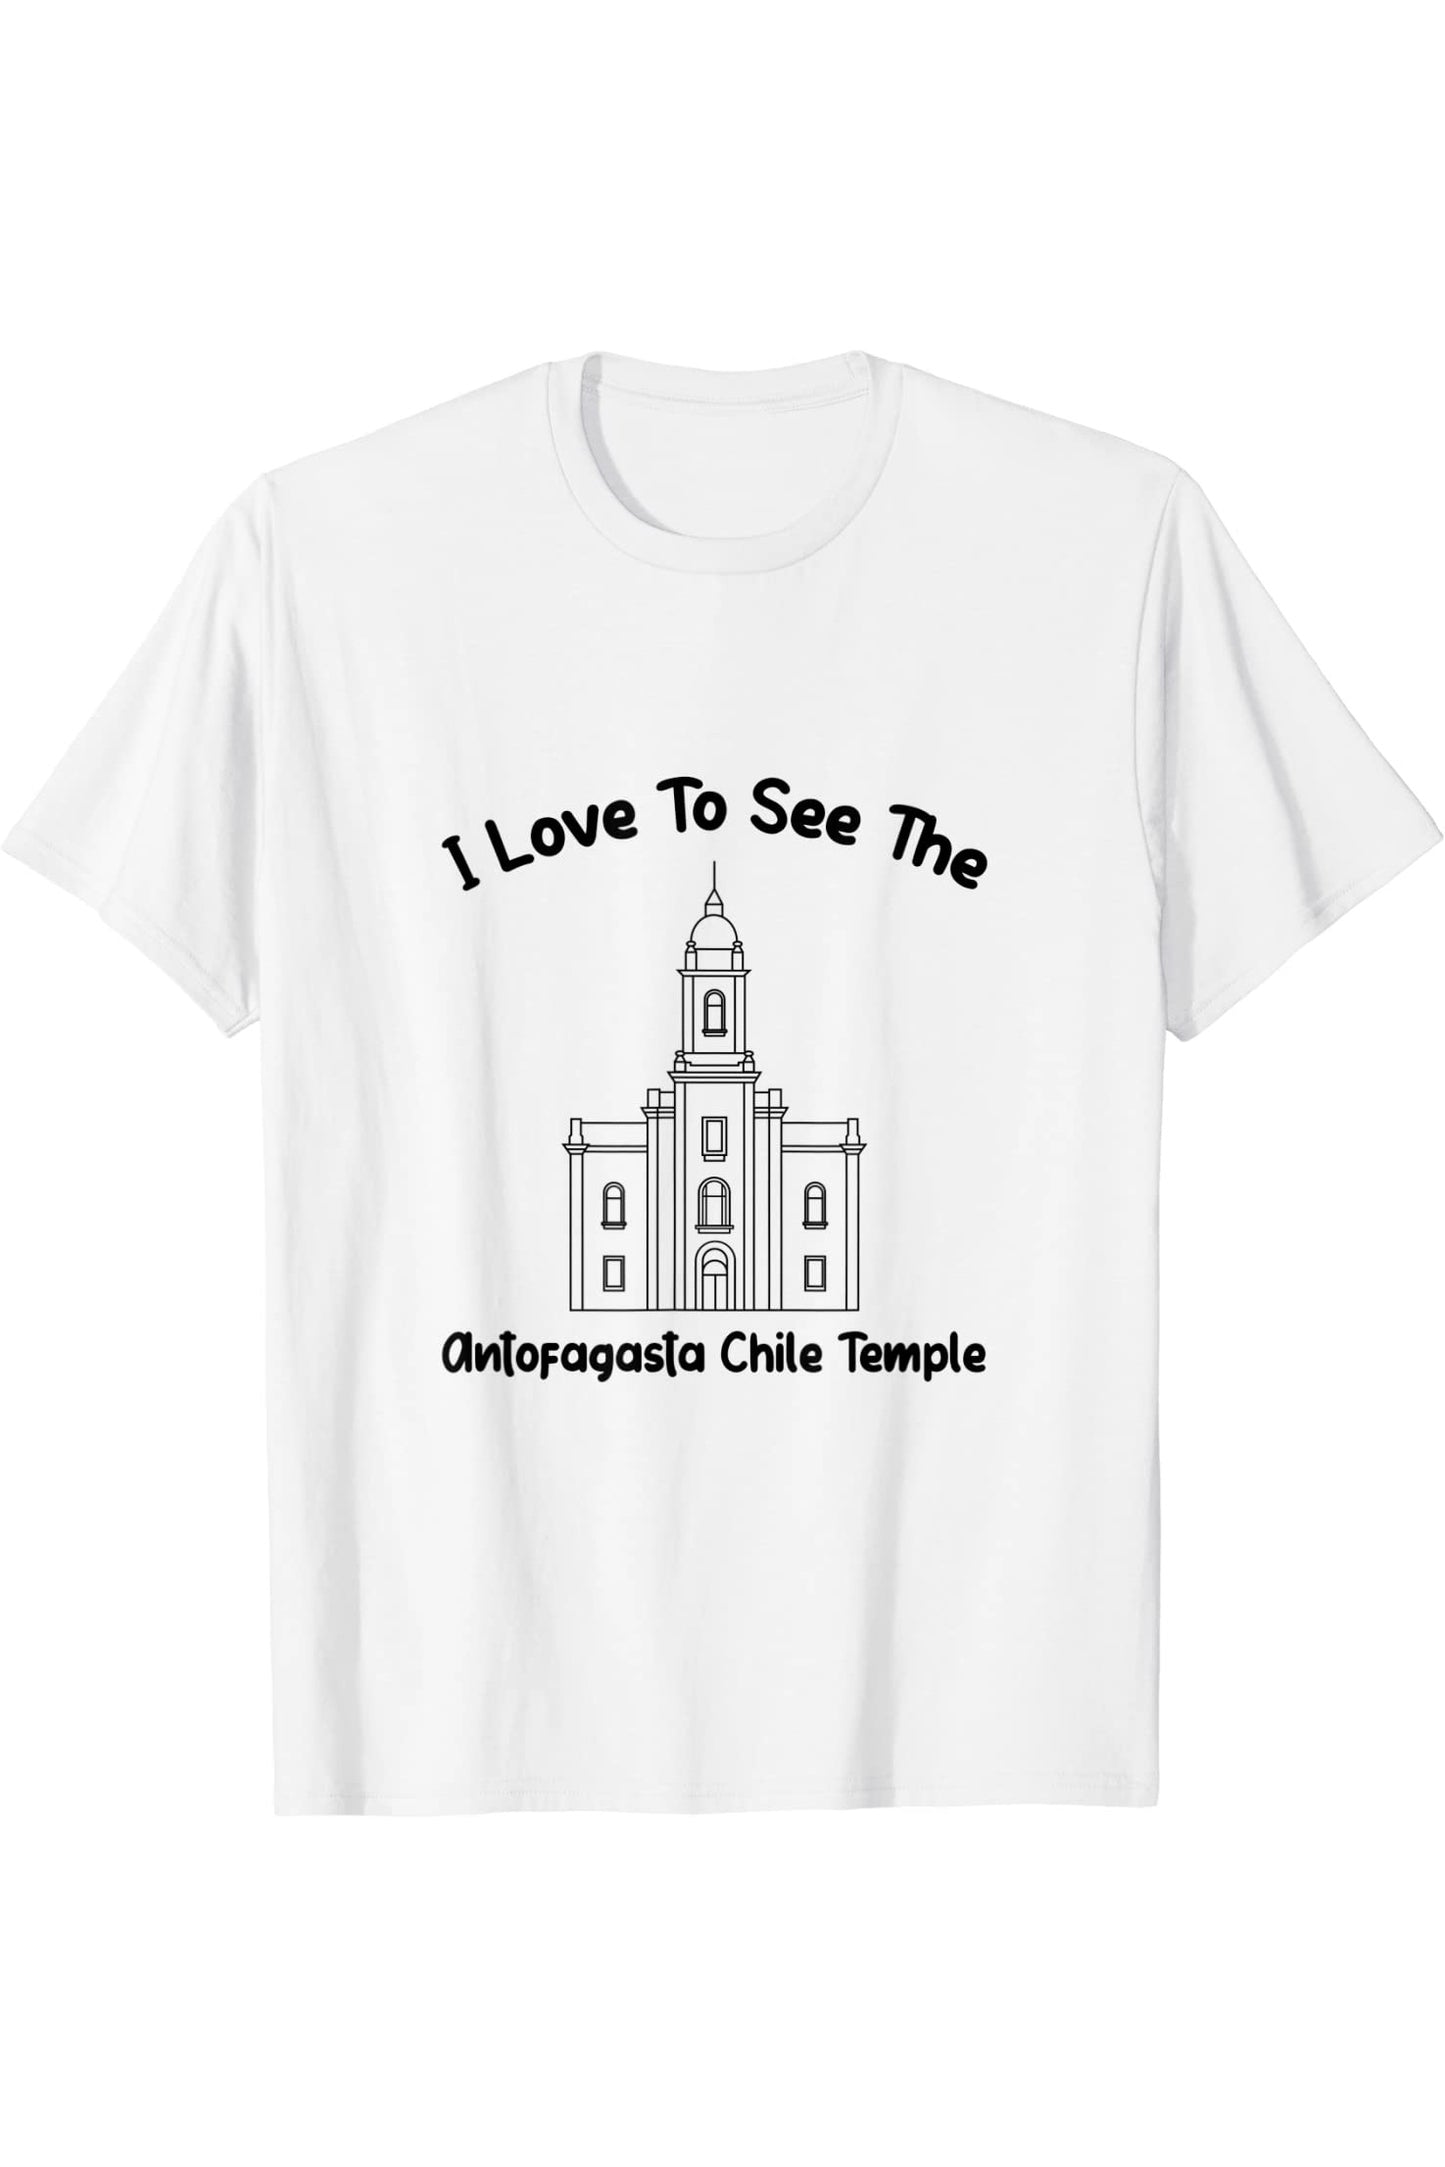 Antofagasta Chile Temple T-Shirt - Primary Style (English) US